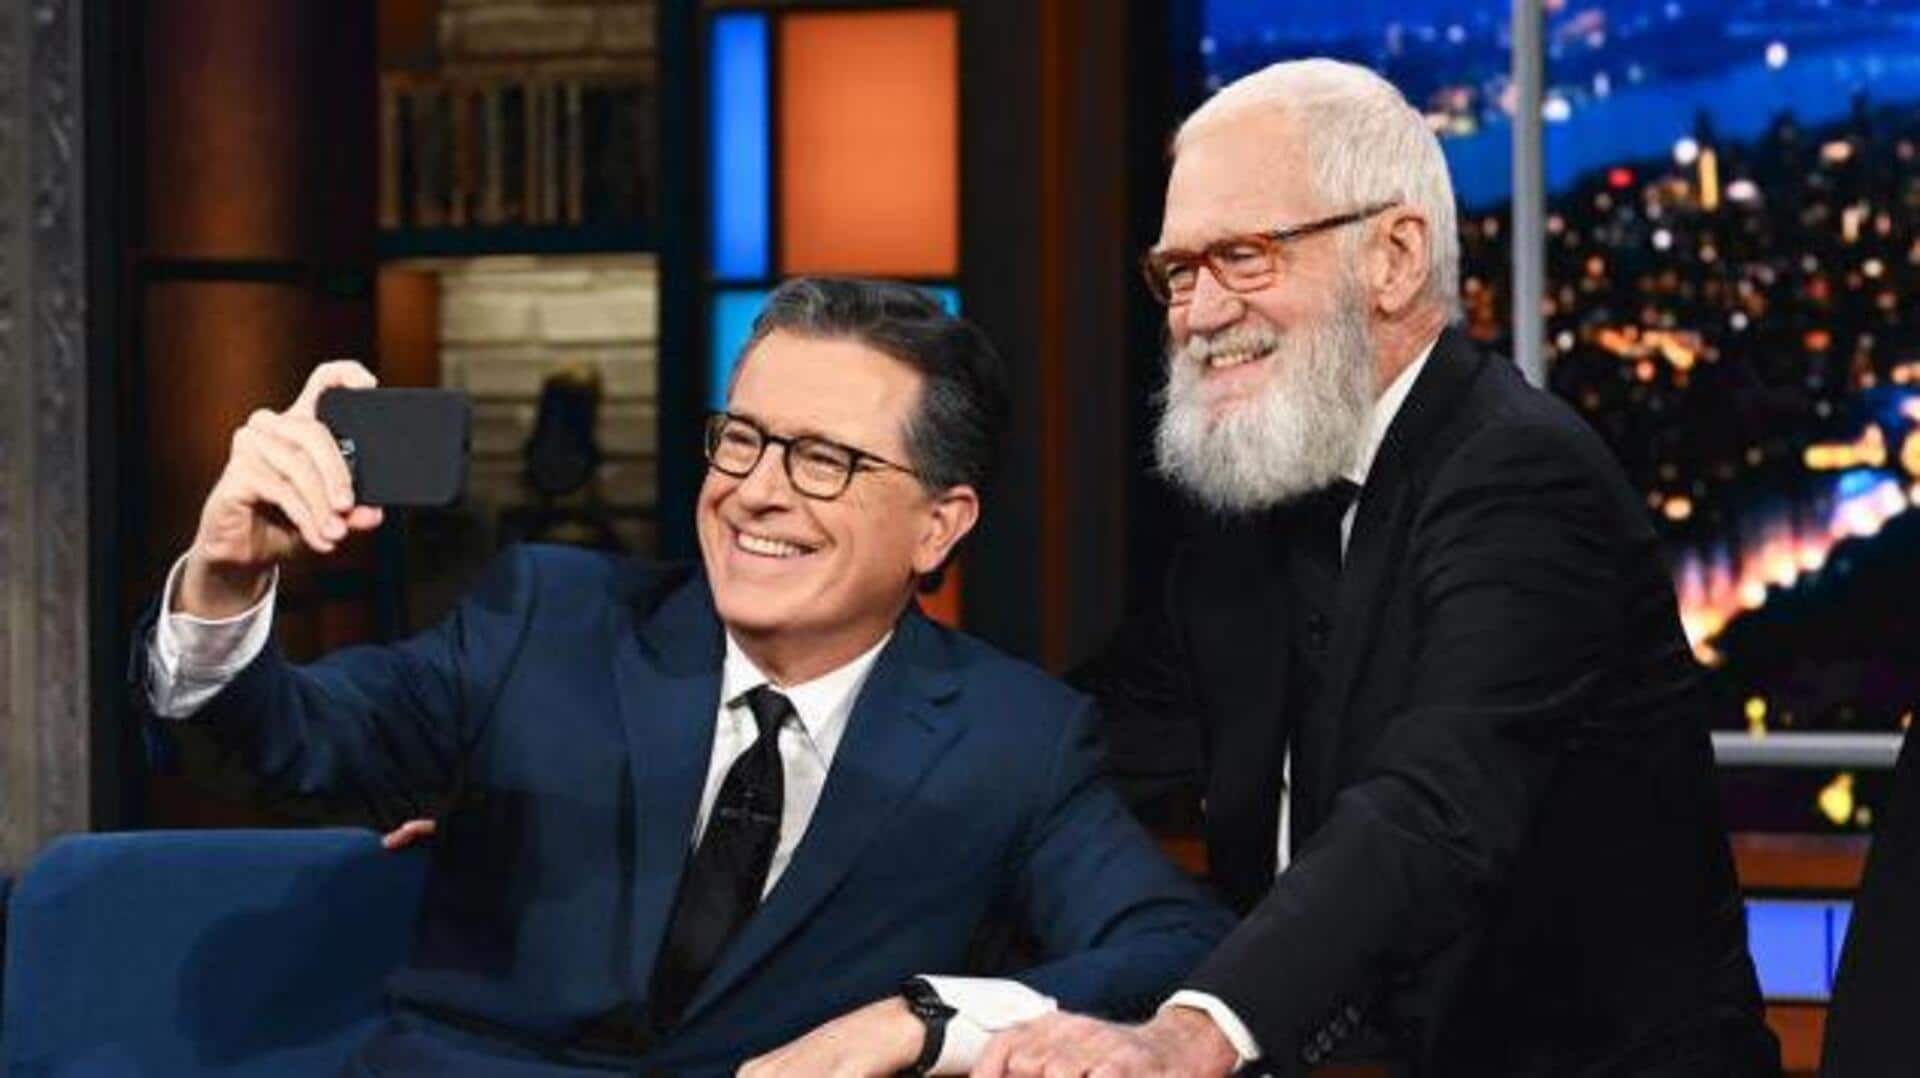 David Letterman makes 'The Late Show' comeback; receives warm welcome